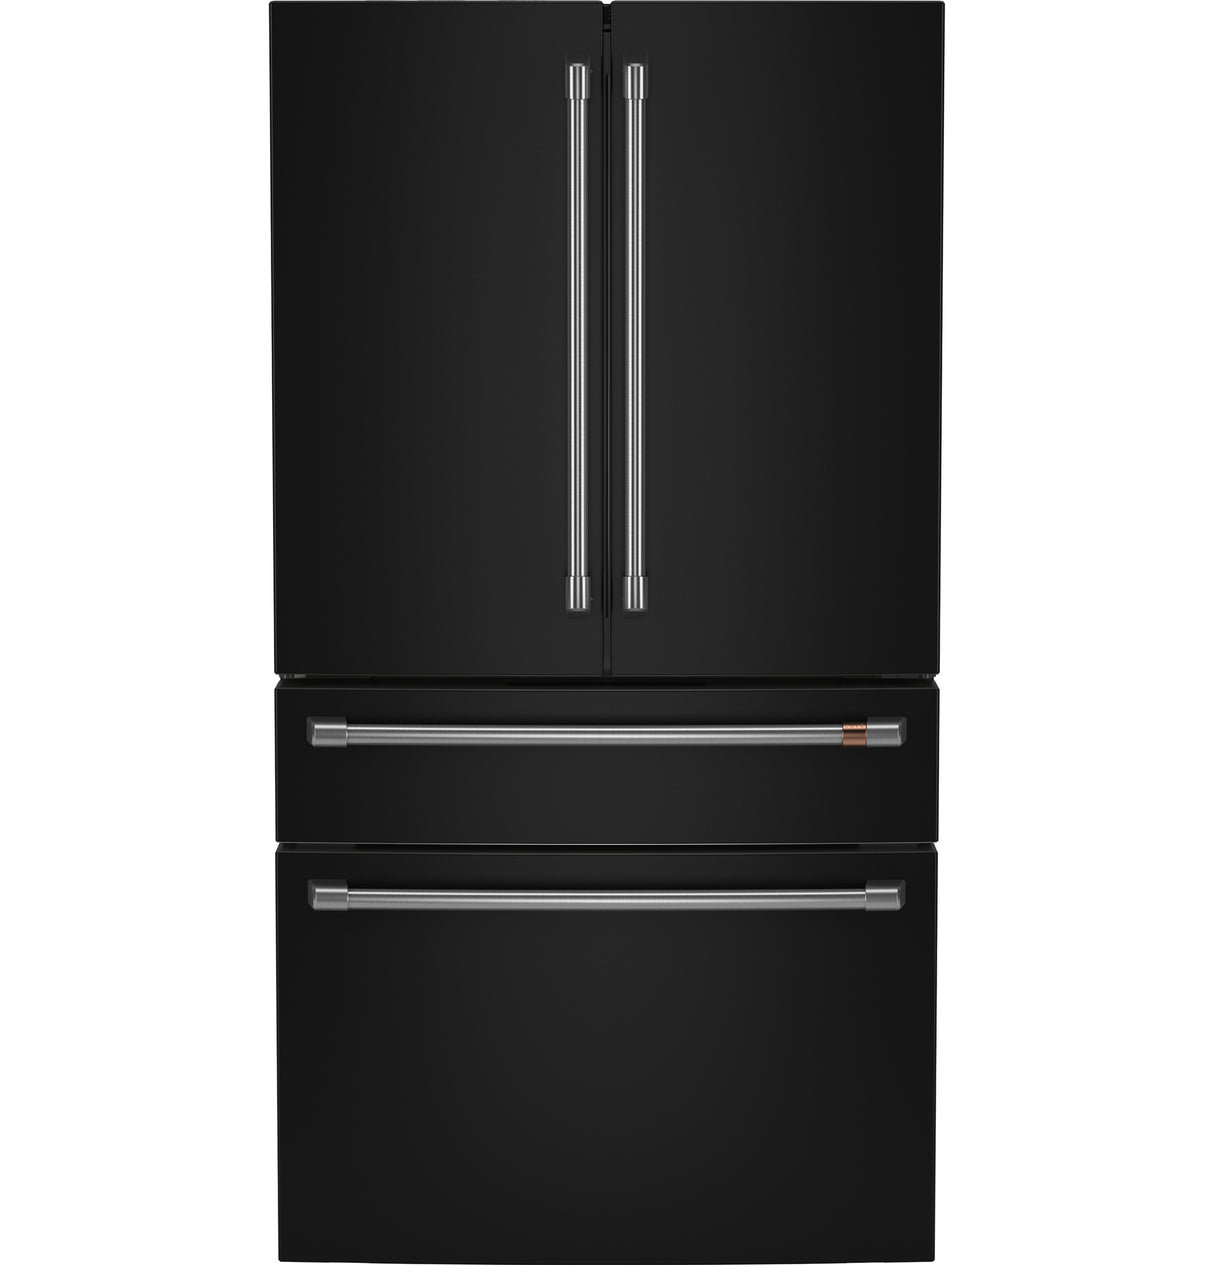 Caf(eback)(TM) ENERGY STAR(R) 28.7 Cu. Ft. Smart 4-Door French-Door Refrigerator With Dual-Dispense AutoFill Pitcher - (CGE29DP3TD1)